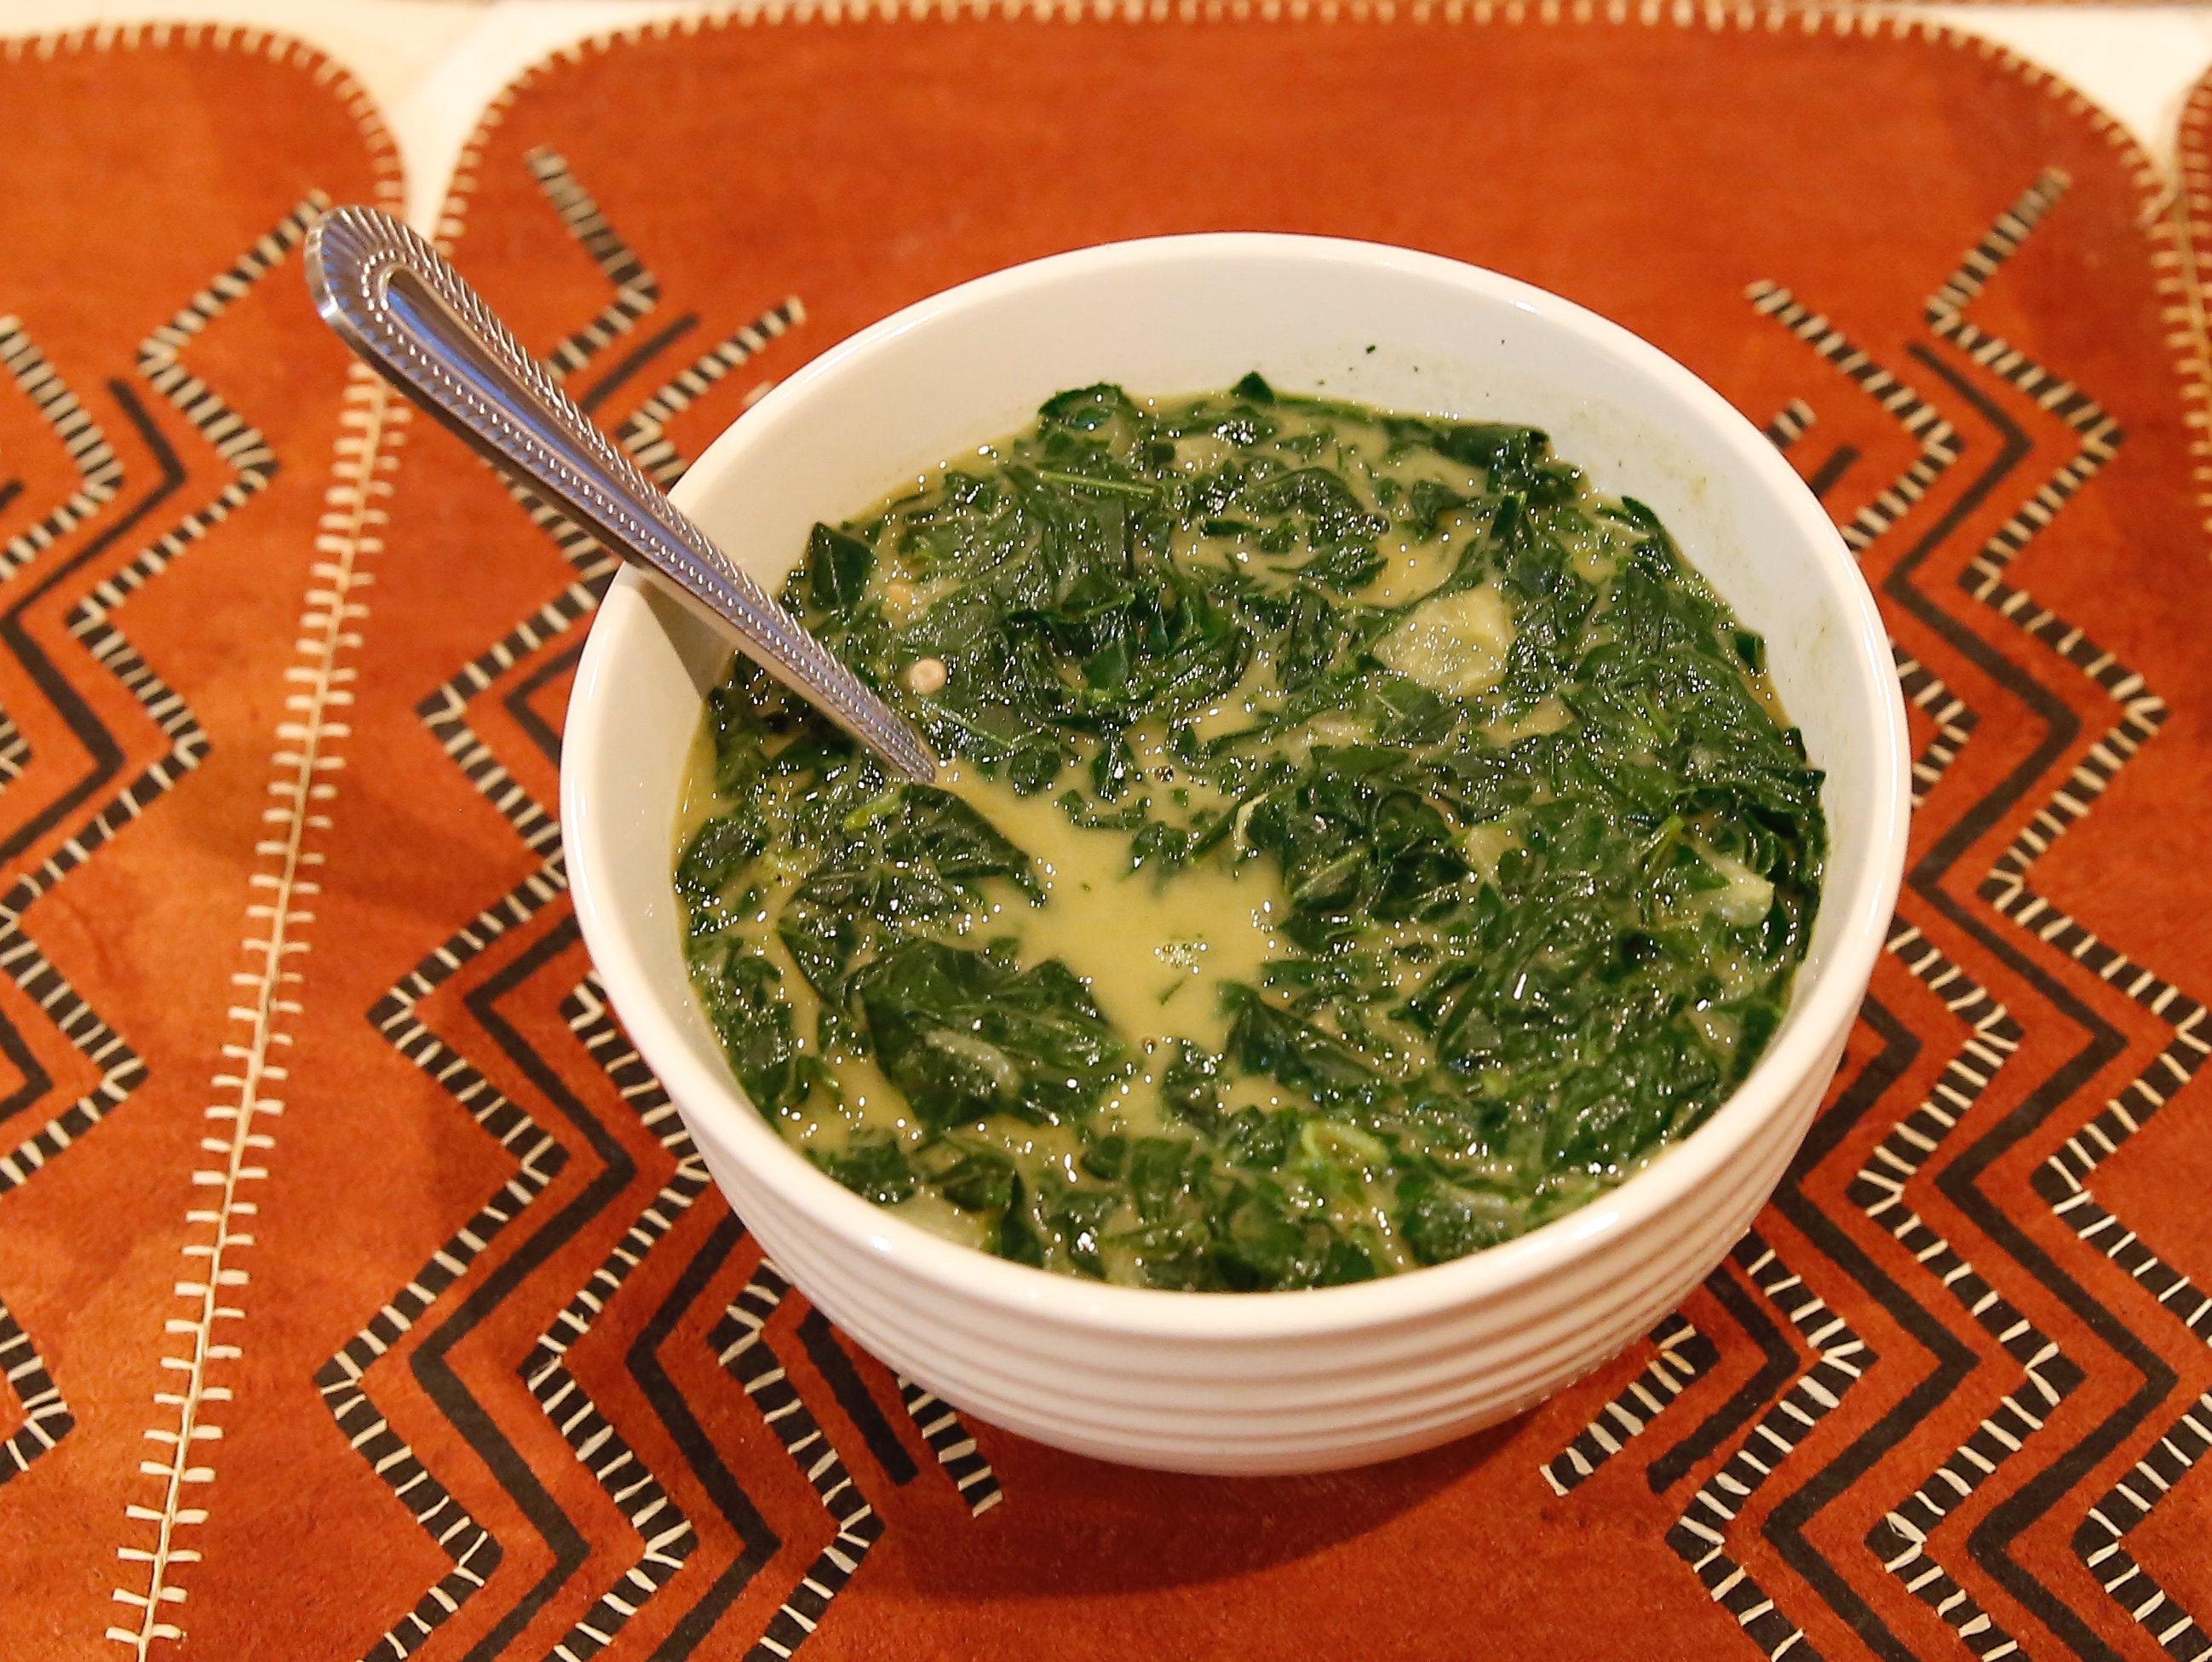 Nyete greens with peanut butter, in a bowl